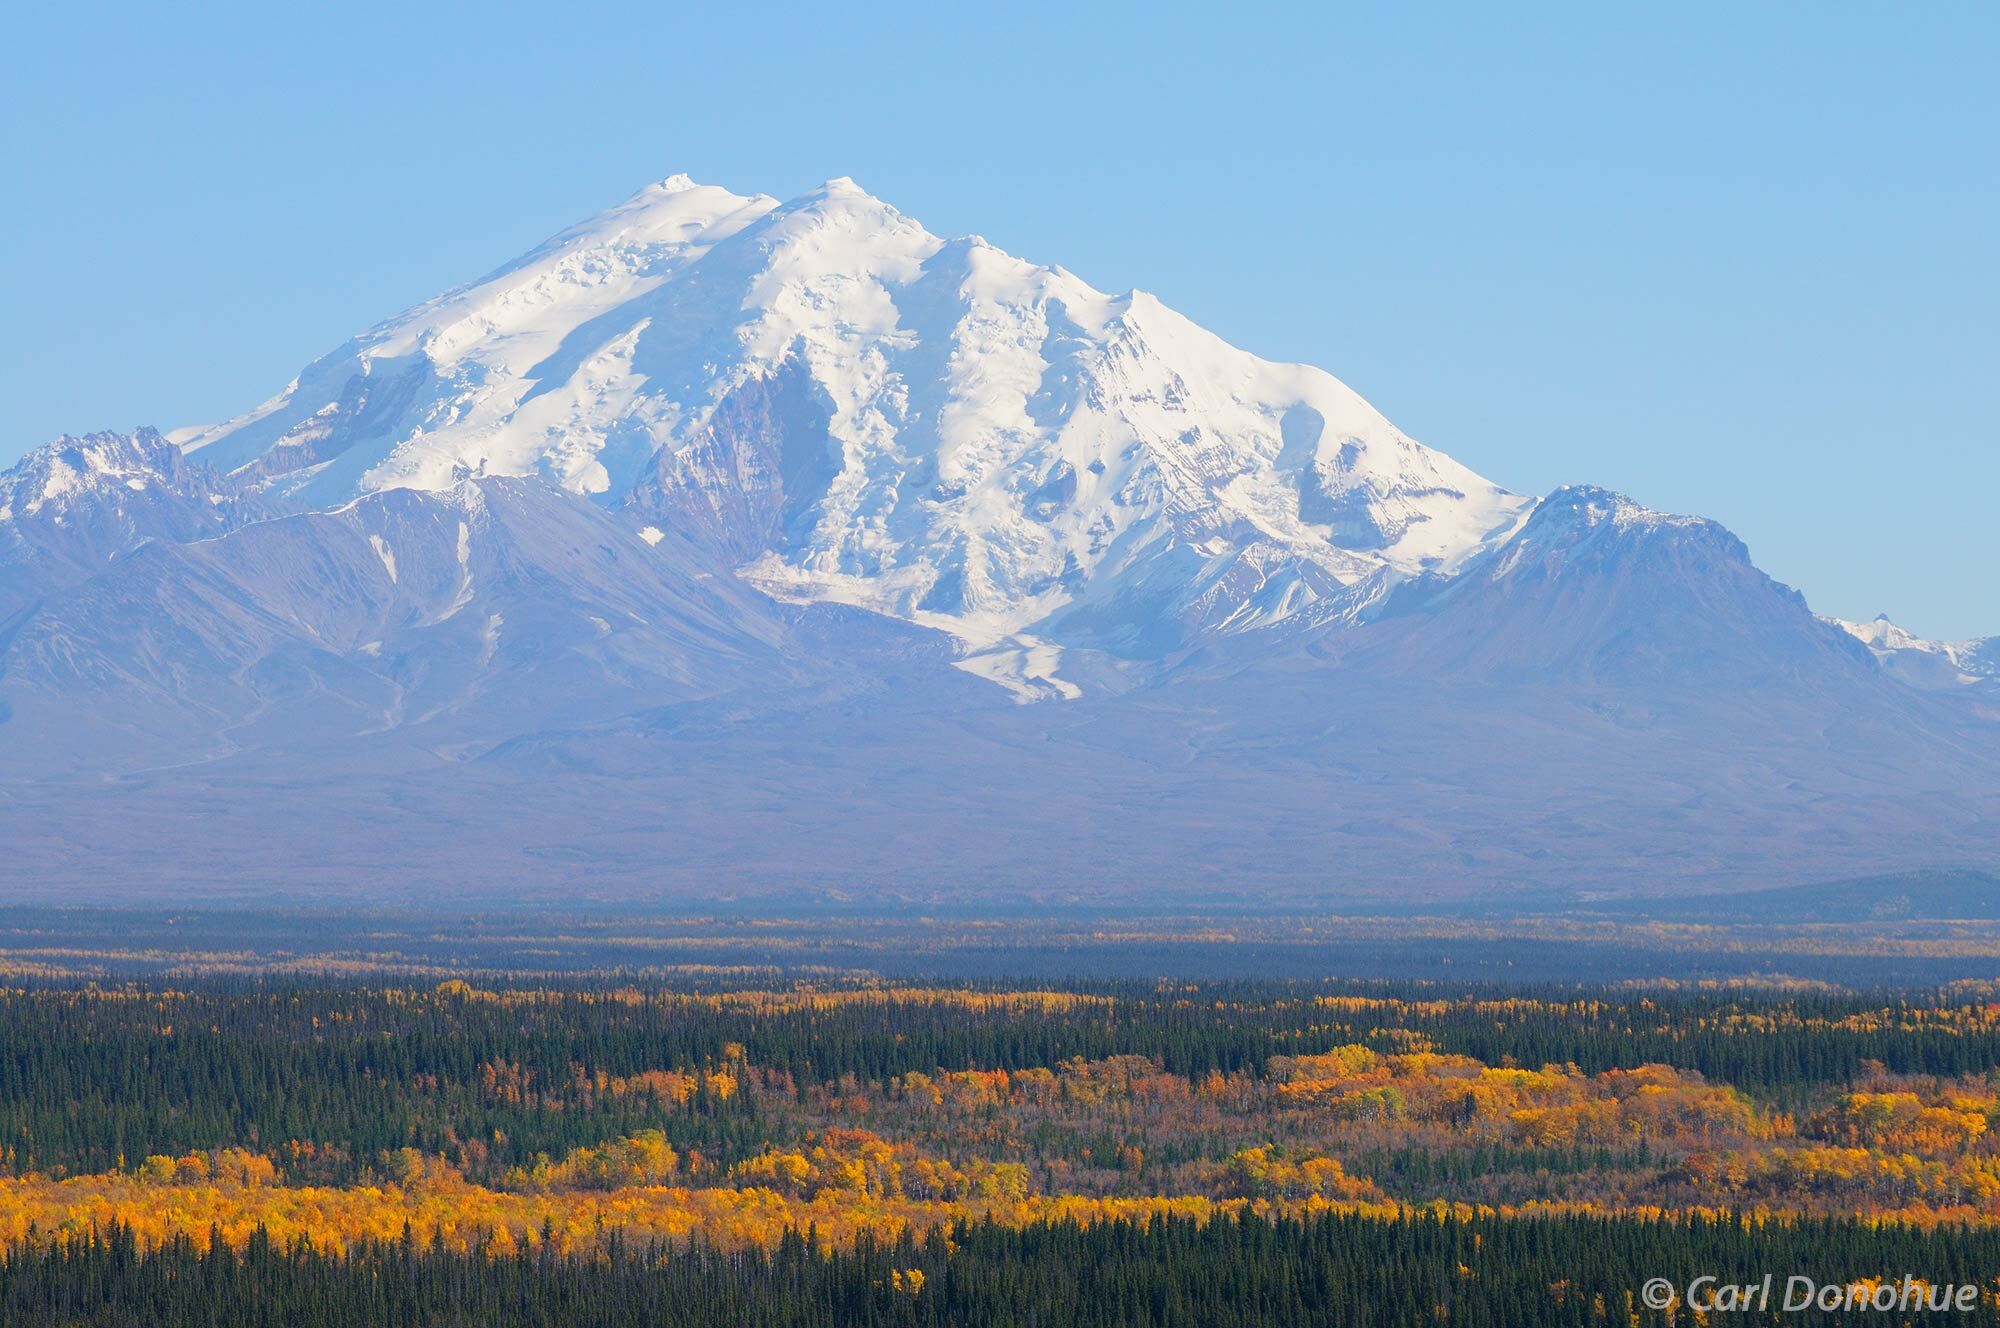 Mount Drum, of the Wrangell Mountains, rises high above the Copper River Basin. Fall colors glow in the boreal forest below....